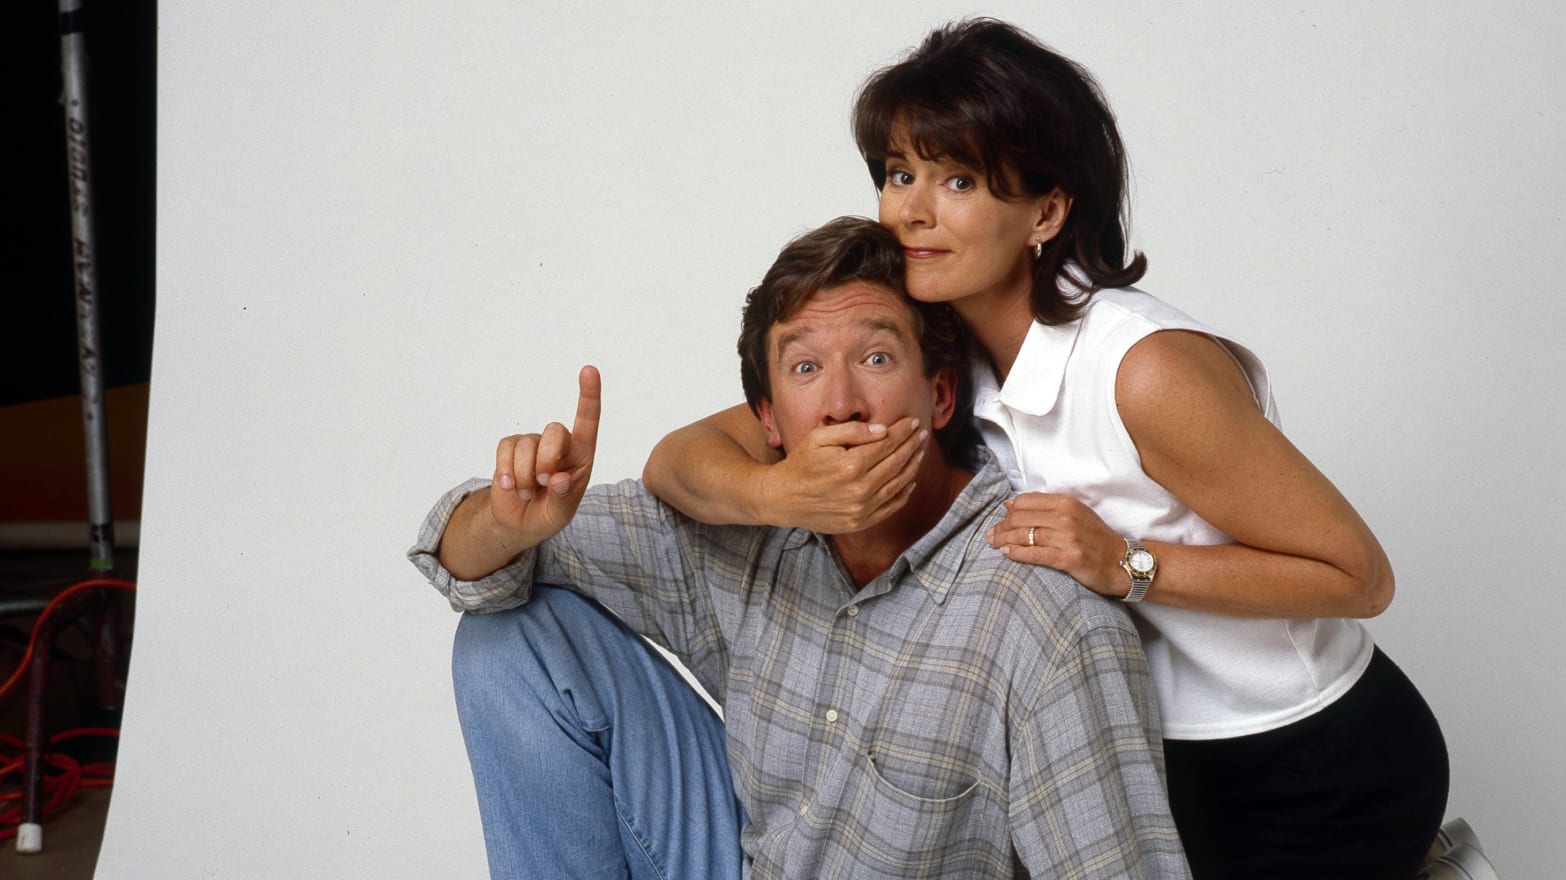 Tim Allen and Patricia Richardson, the stars of Home Improvement, in 1995